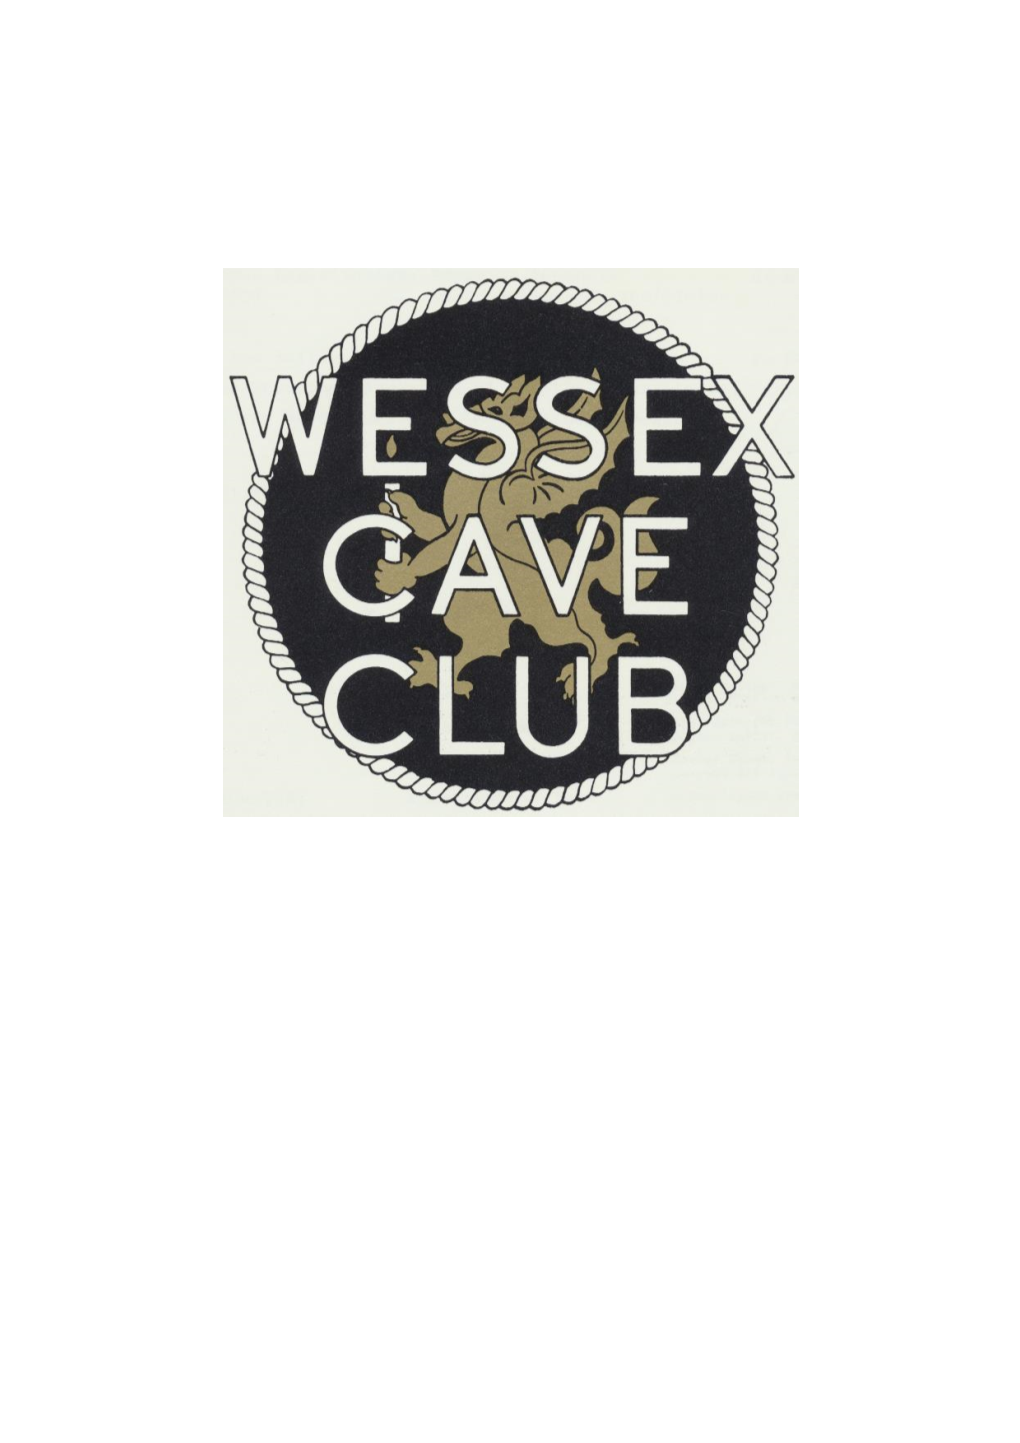 The Wessex Cave Club Journal Volume 20 (Number 221) June 1989